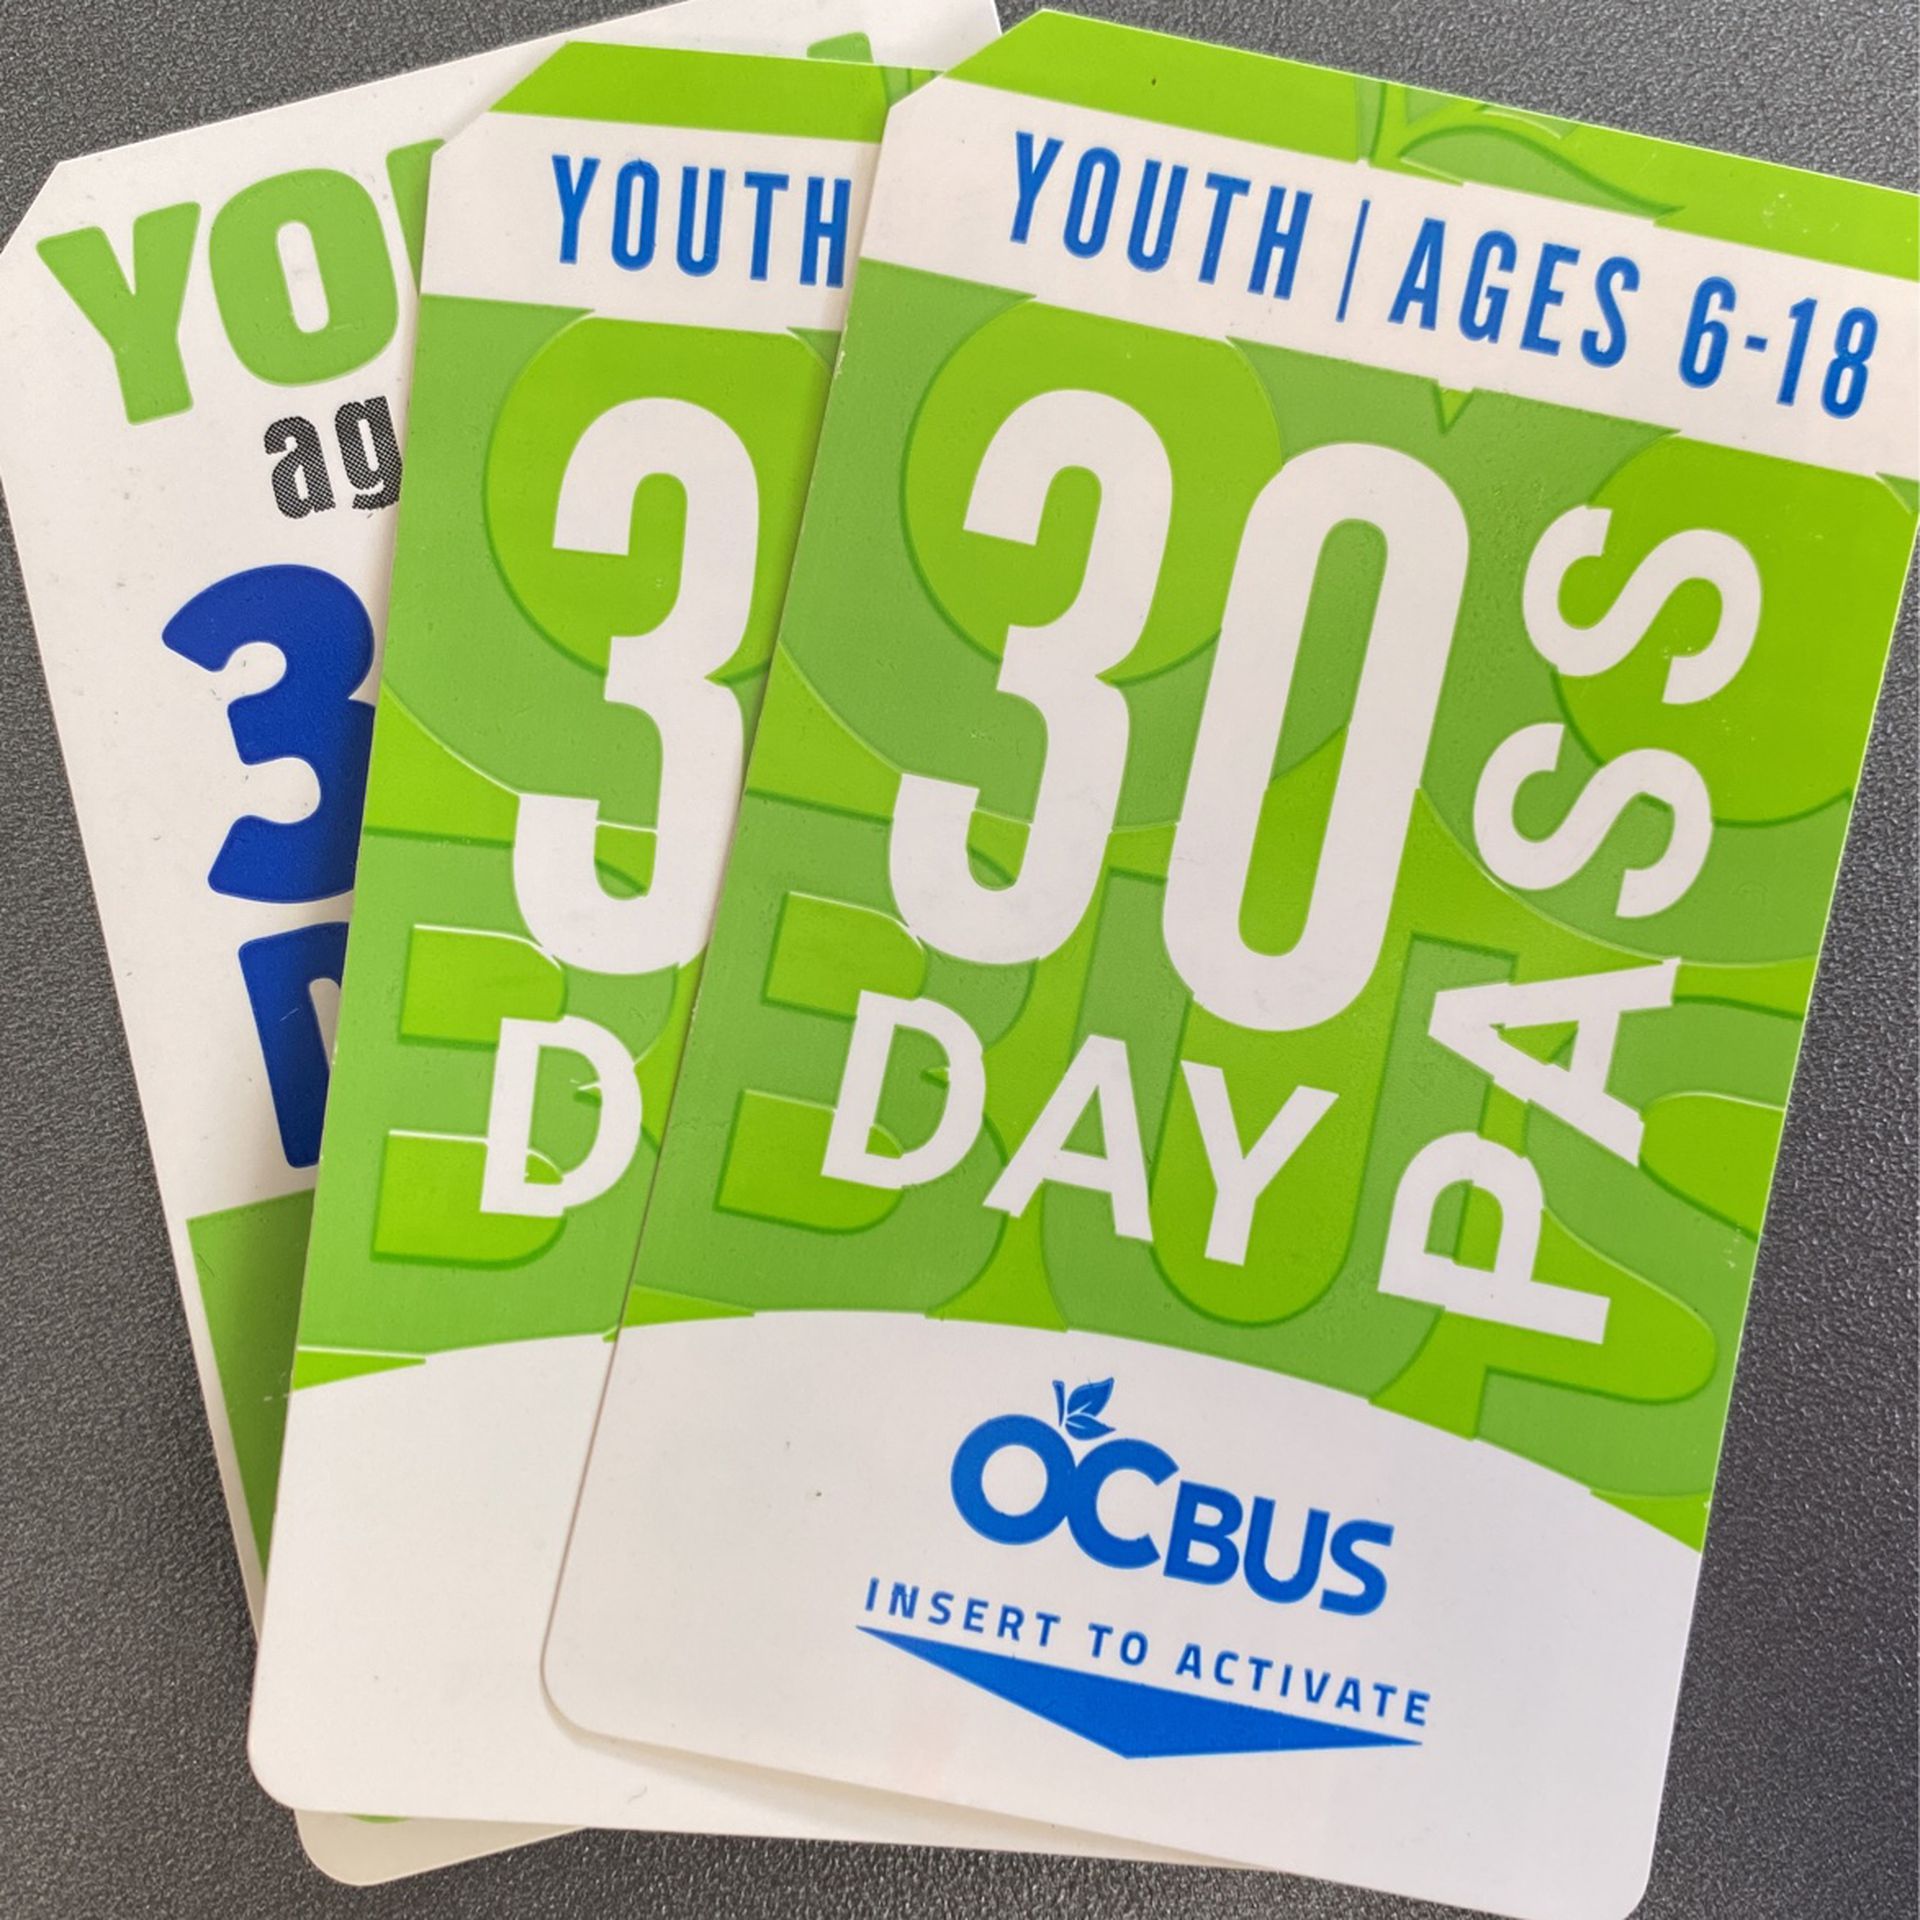 Youth 30 Day OCTA Bus pass